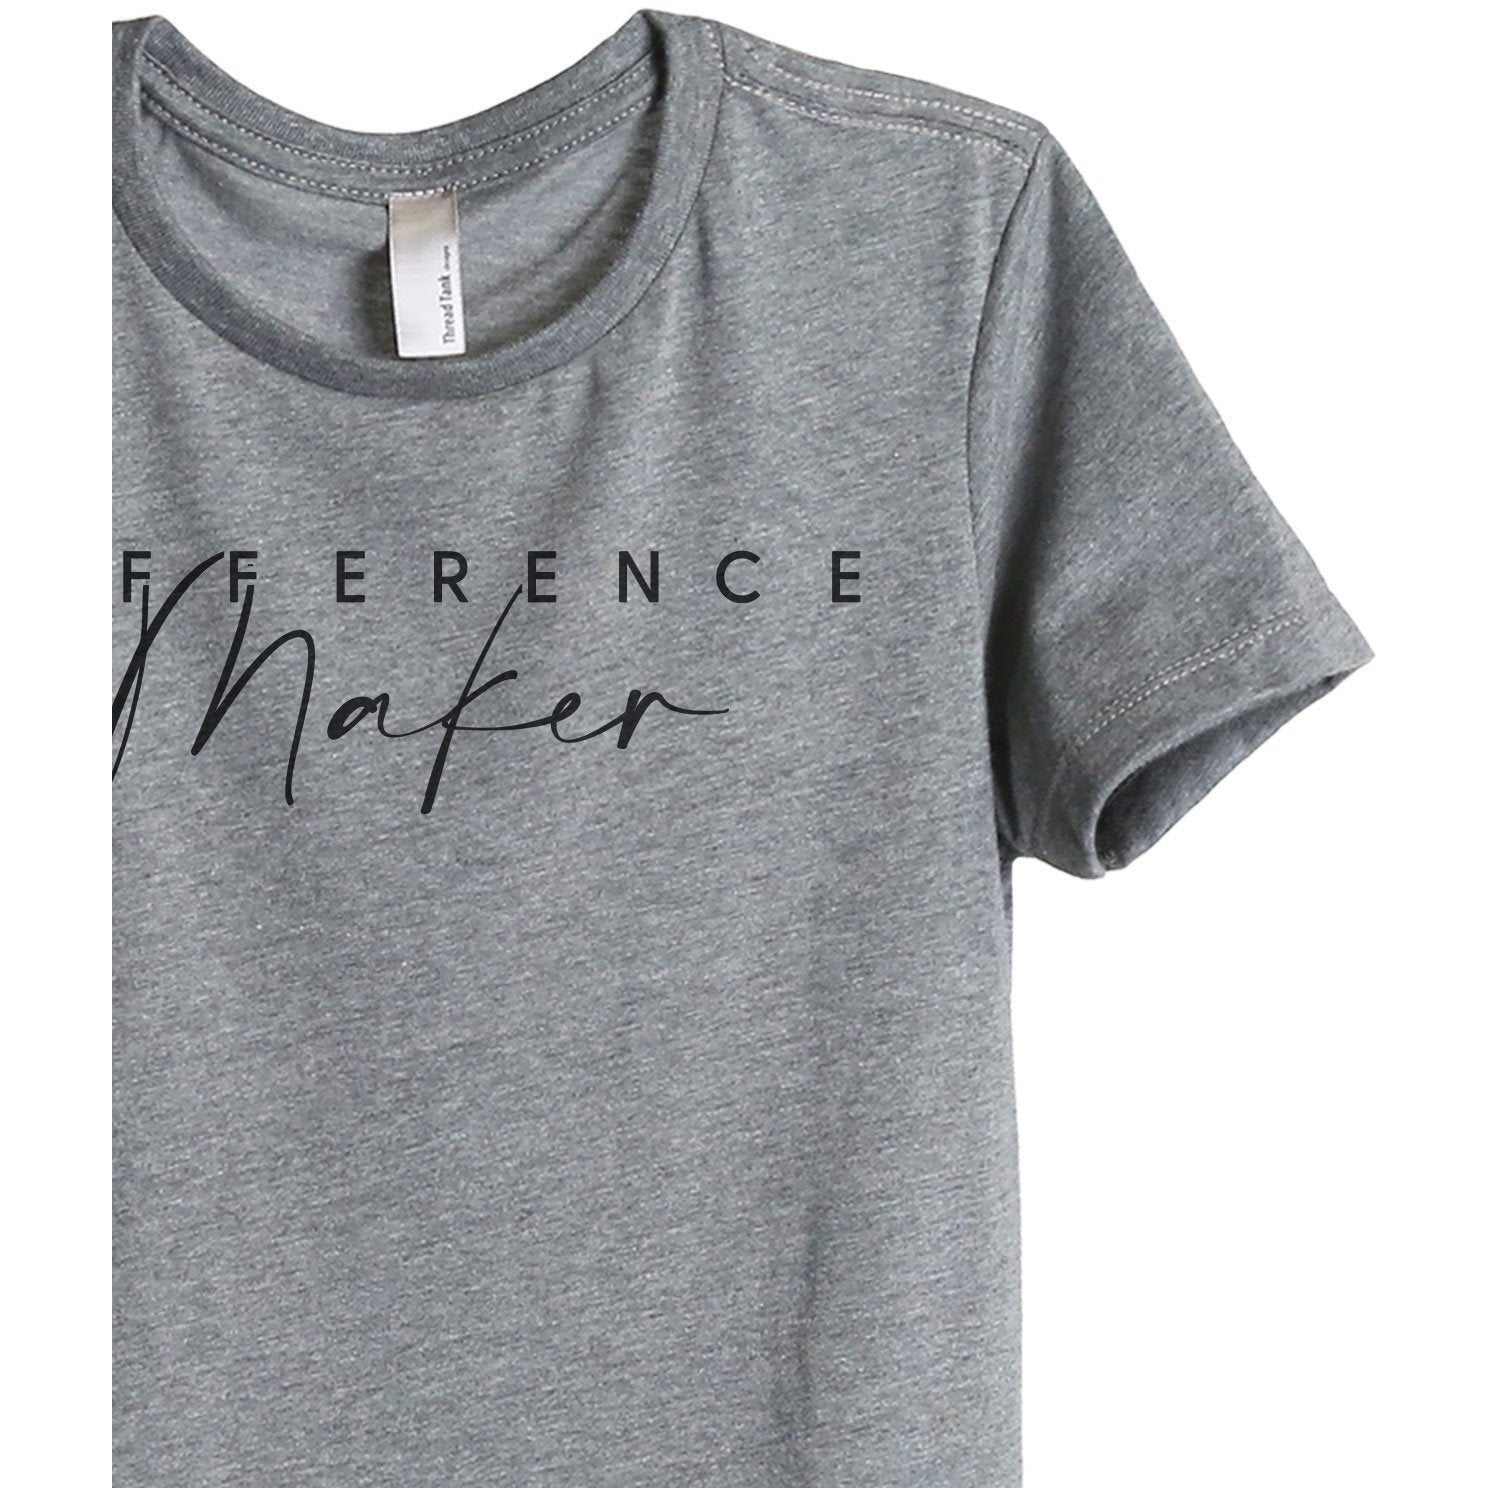 Difference Maker Women's Relaxed Crewneck T-Shirt Top Tee Heather Grey Zoom Details
